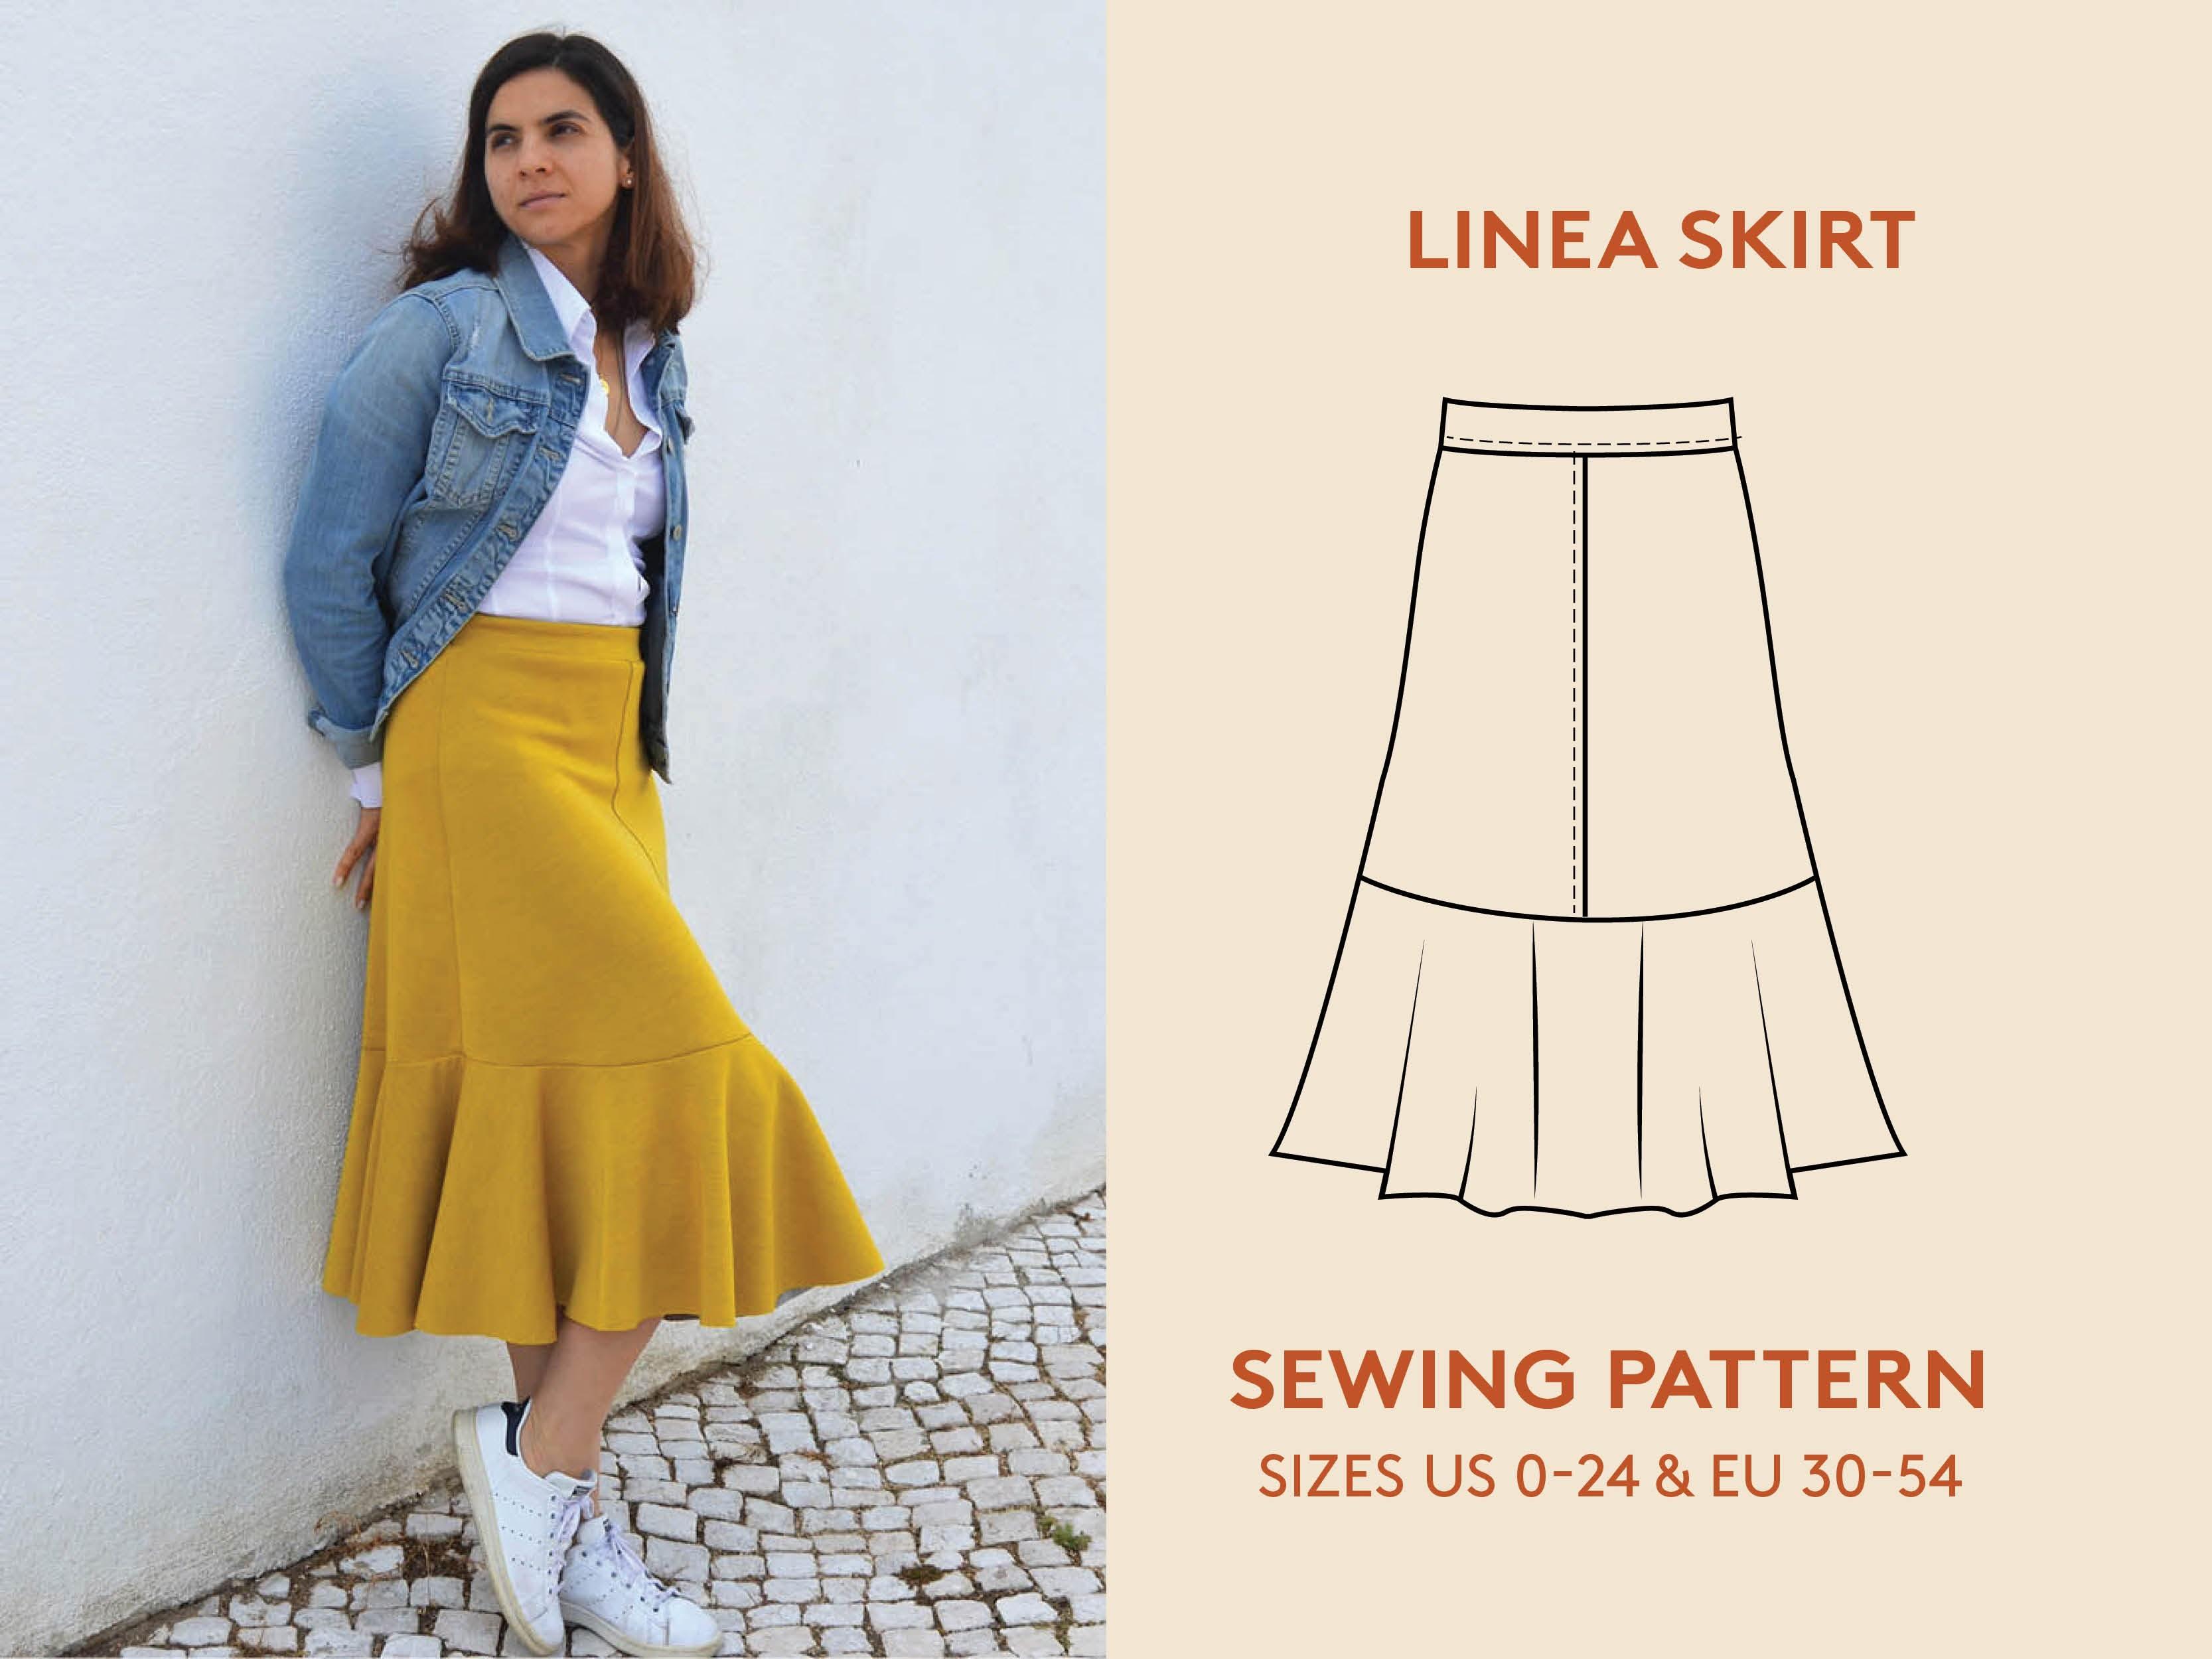 Linea A-line skirt sewing pattern